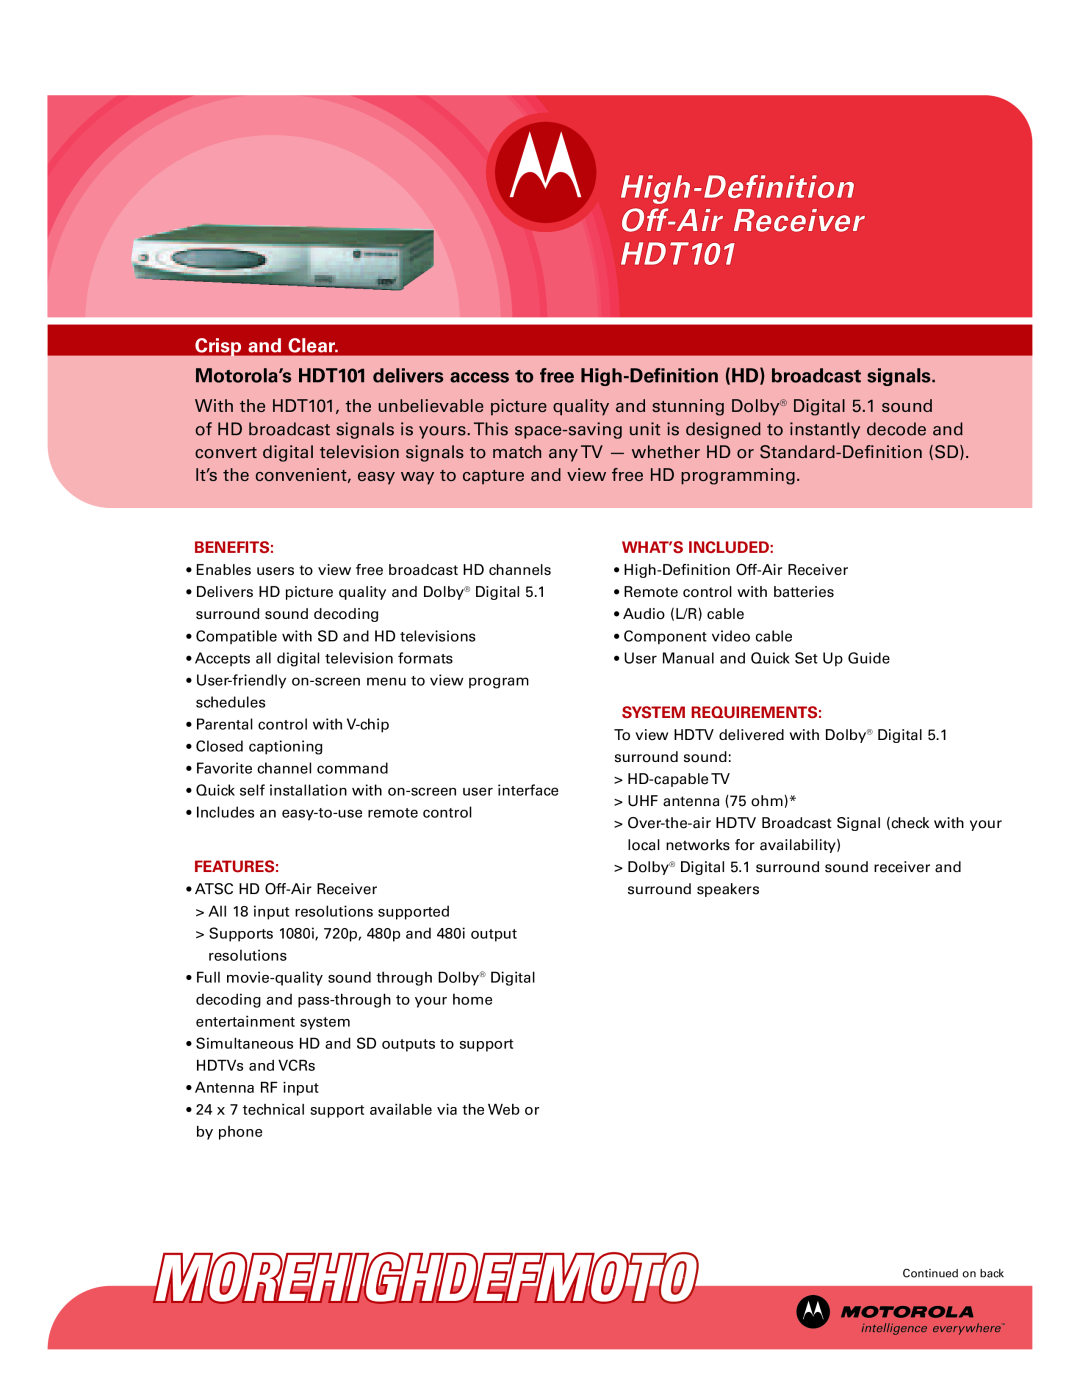 Motorola user manual High-Definition Off-Air Receiver HDT101, Crisp and Clear 